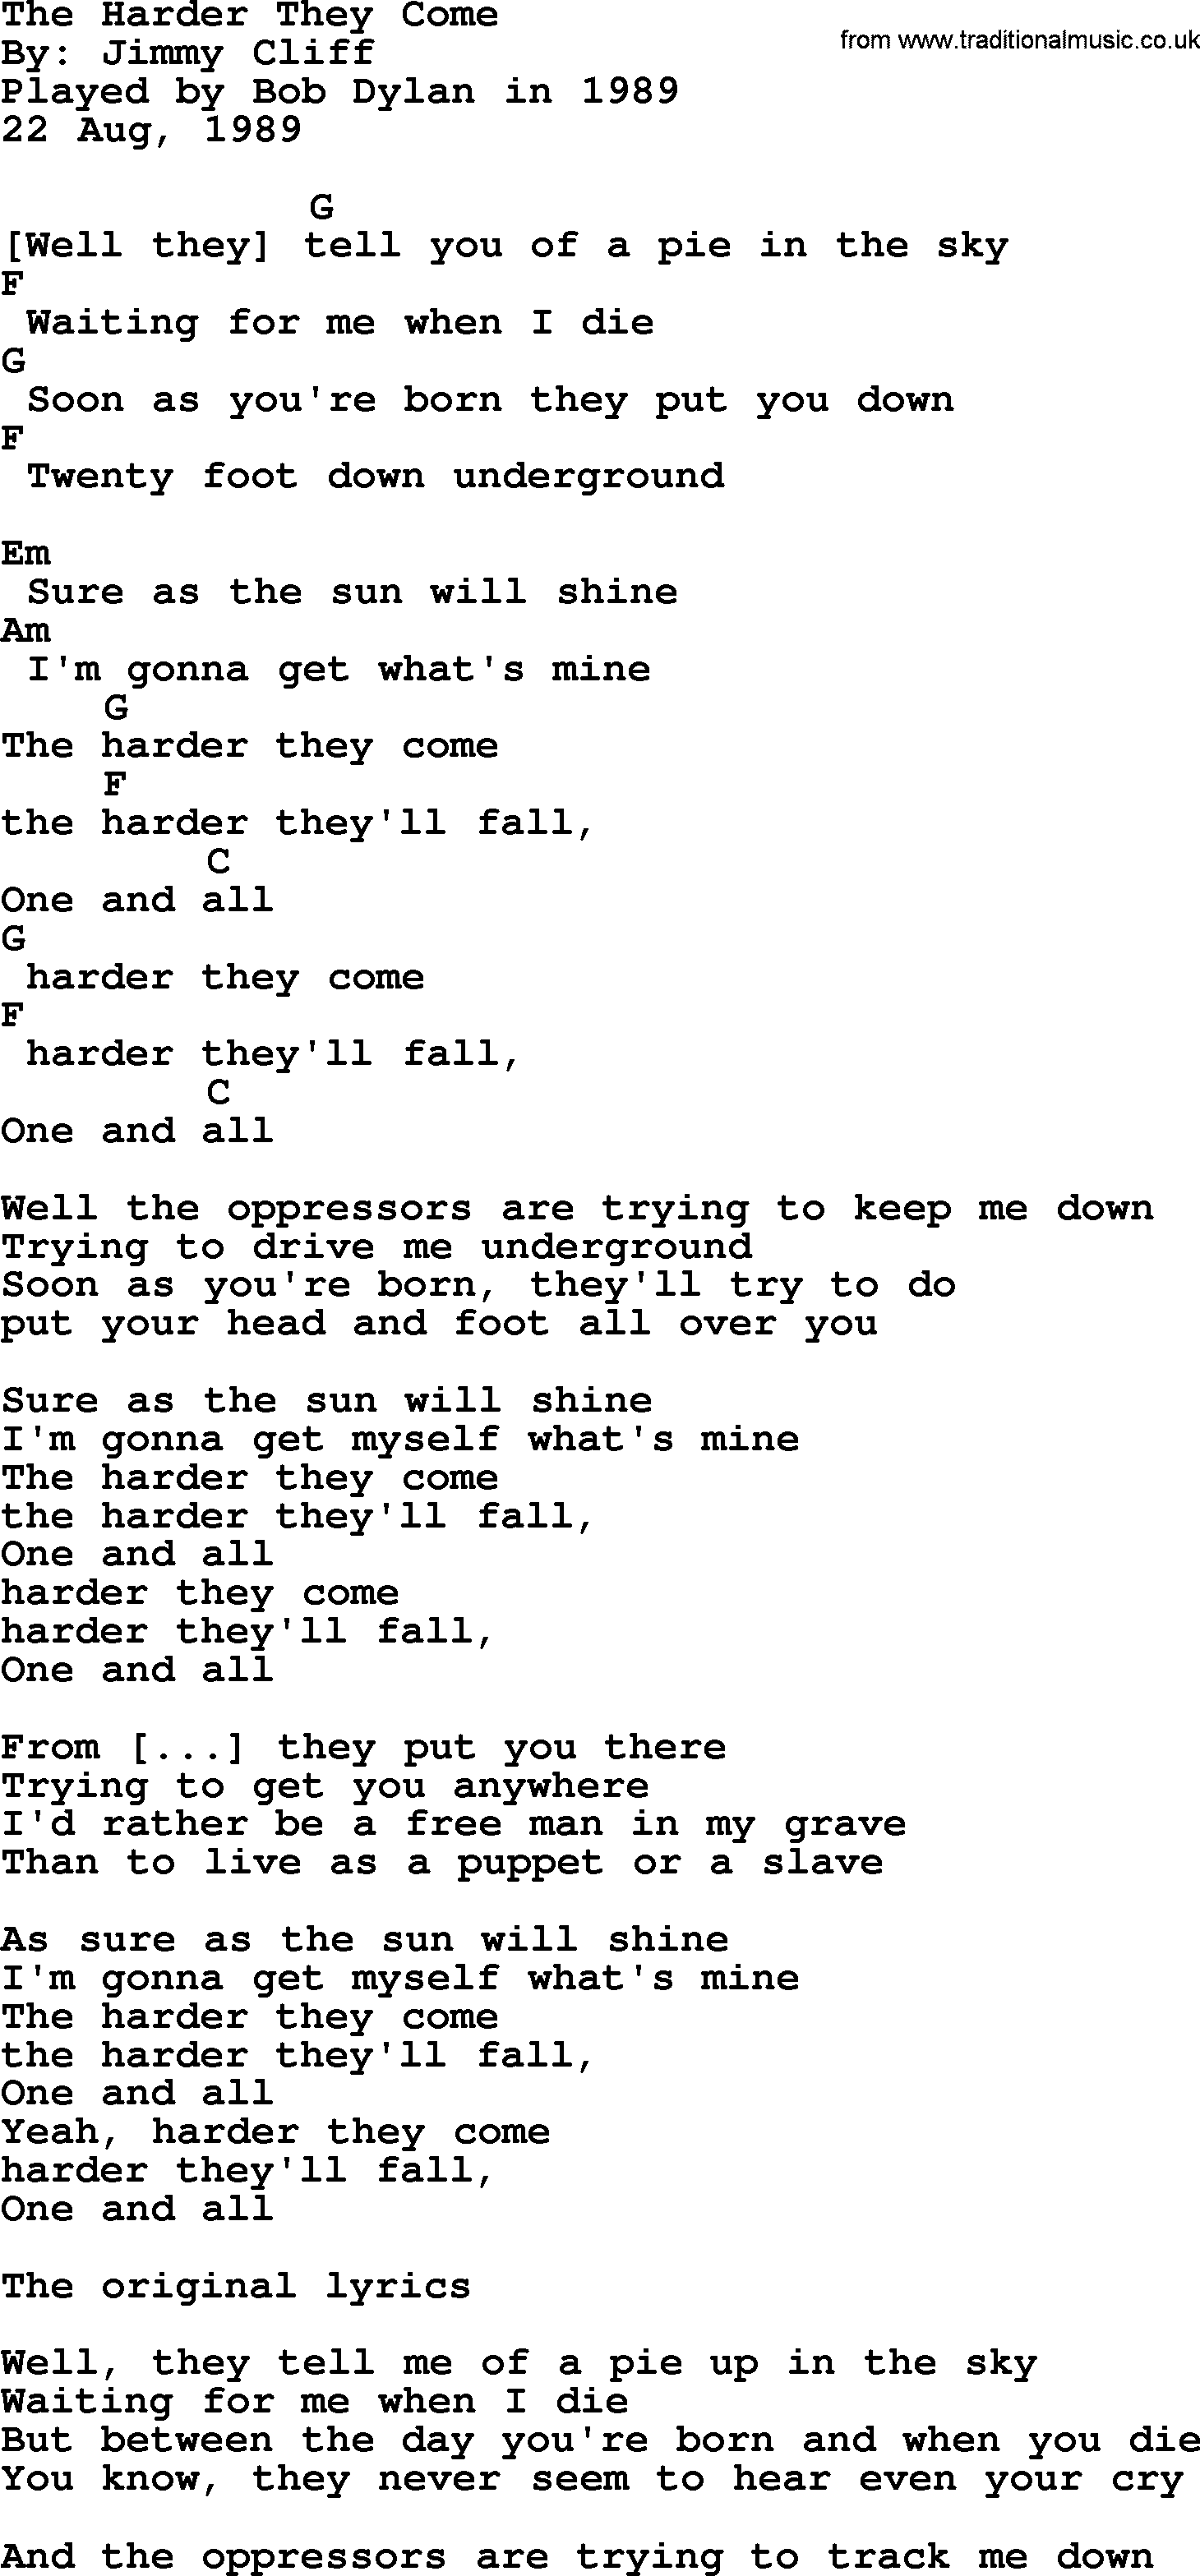 Bob Dylan song, lyrics with chords - The Harder They Come